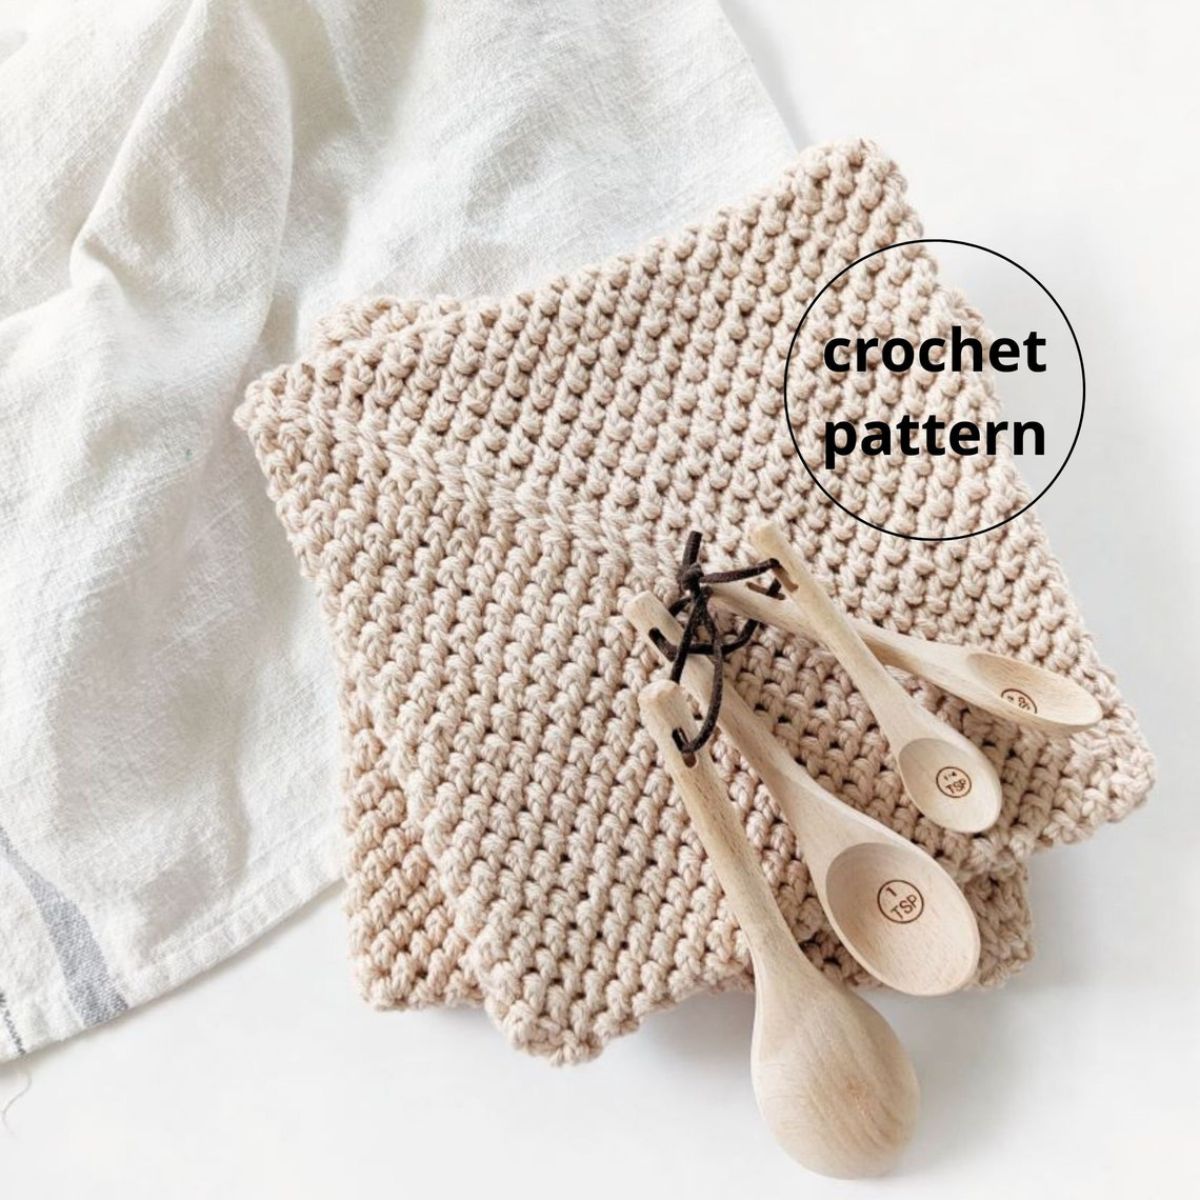 Two beige crochet potholders stacked on top of each other with a small wooden spoon set next to them.